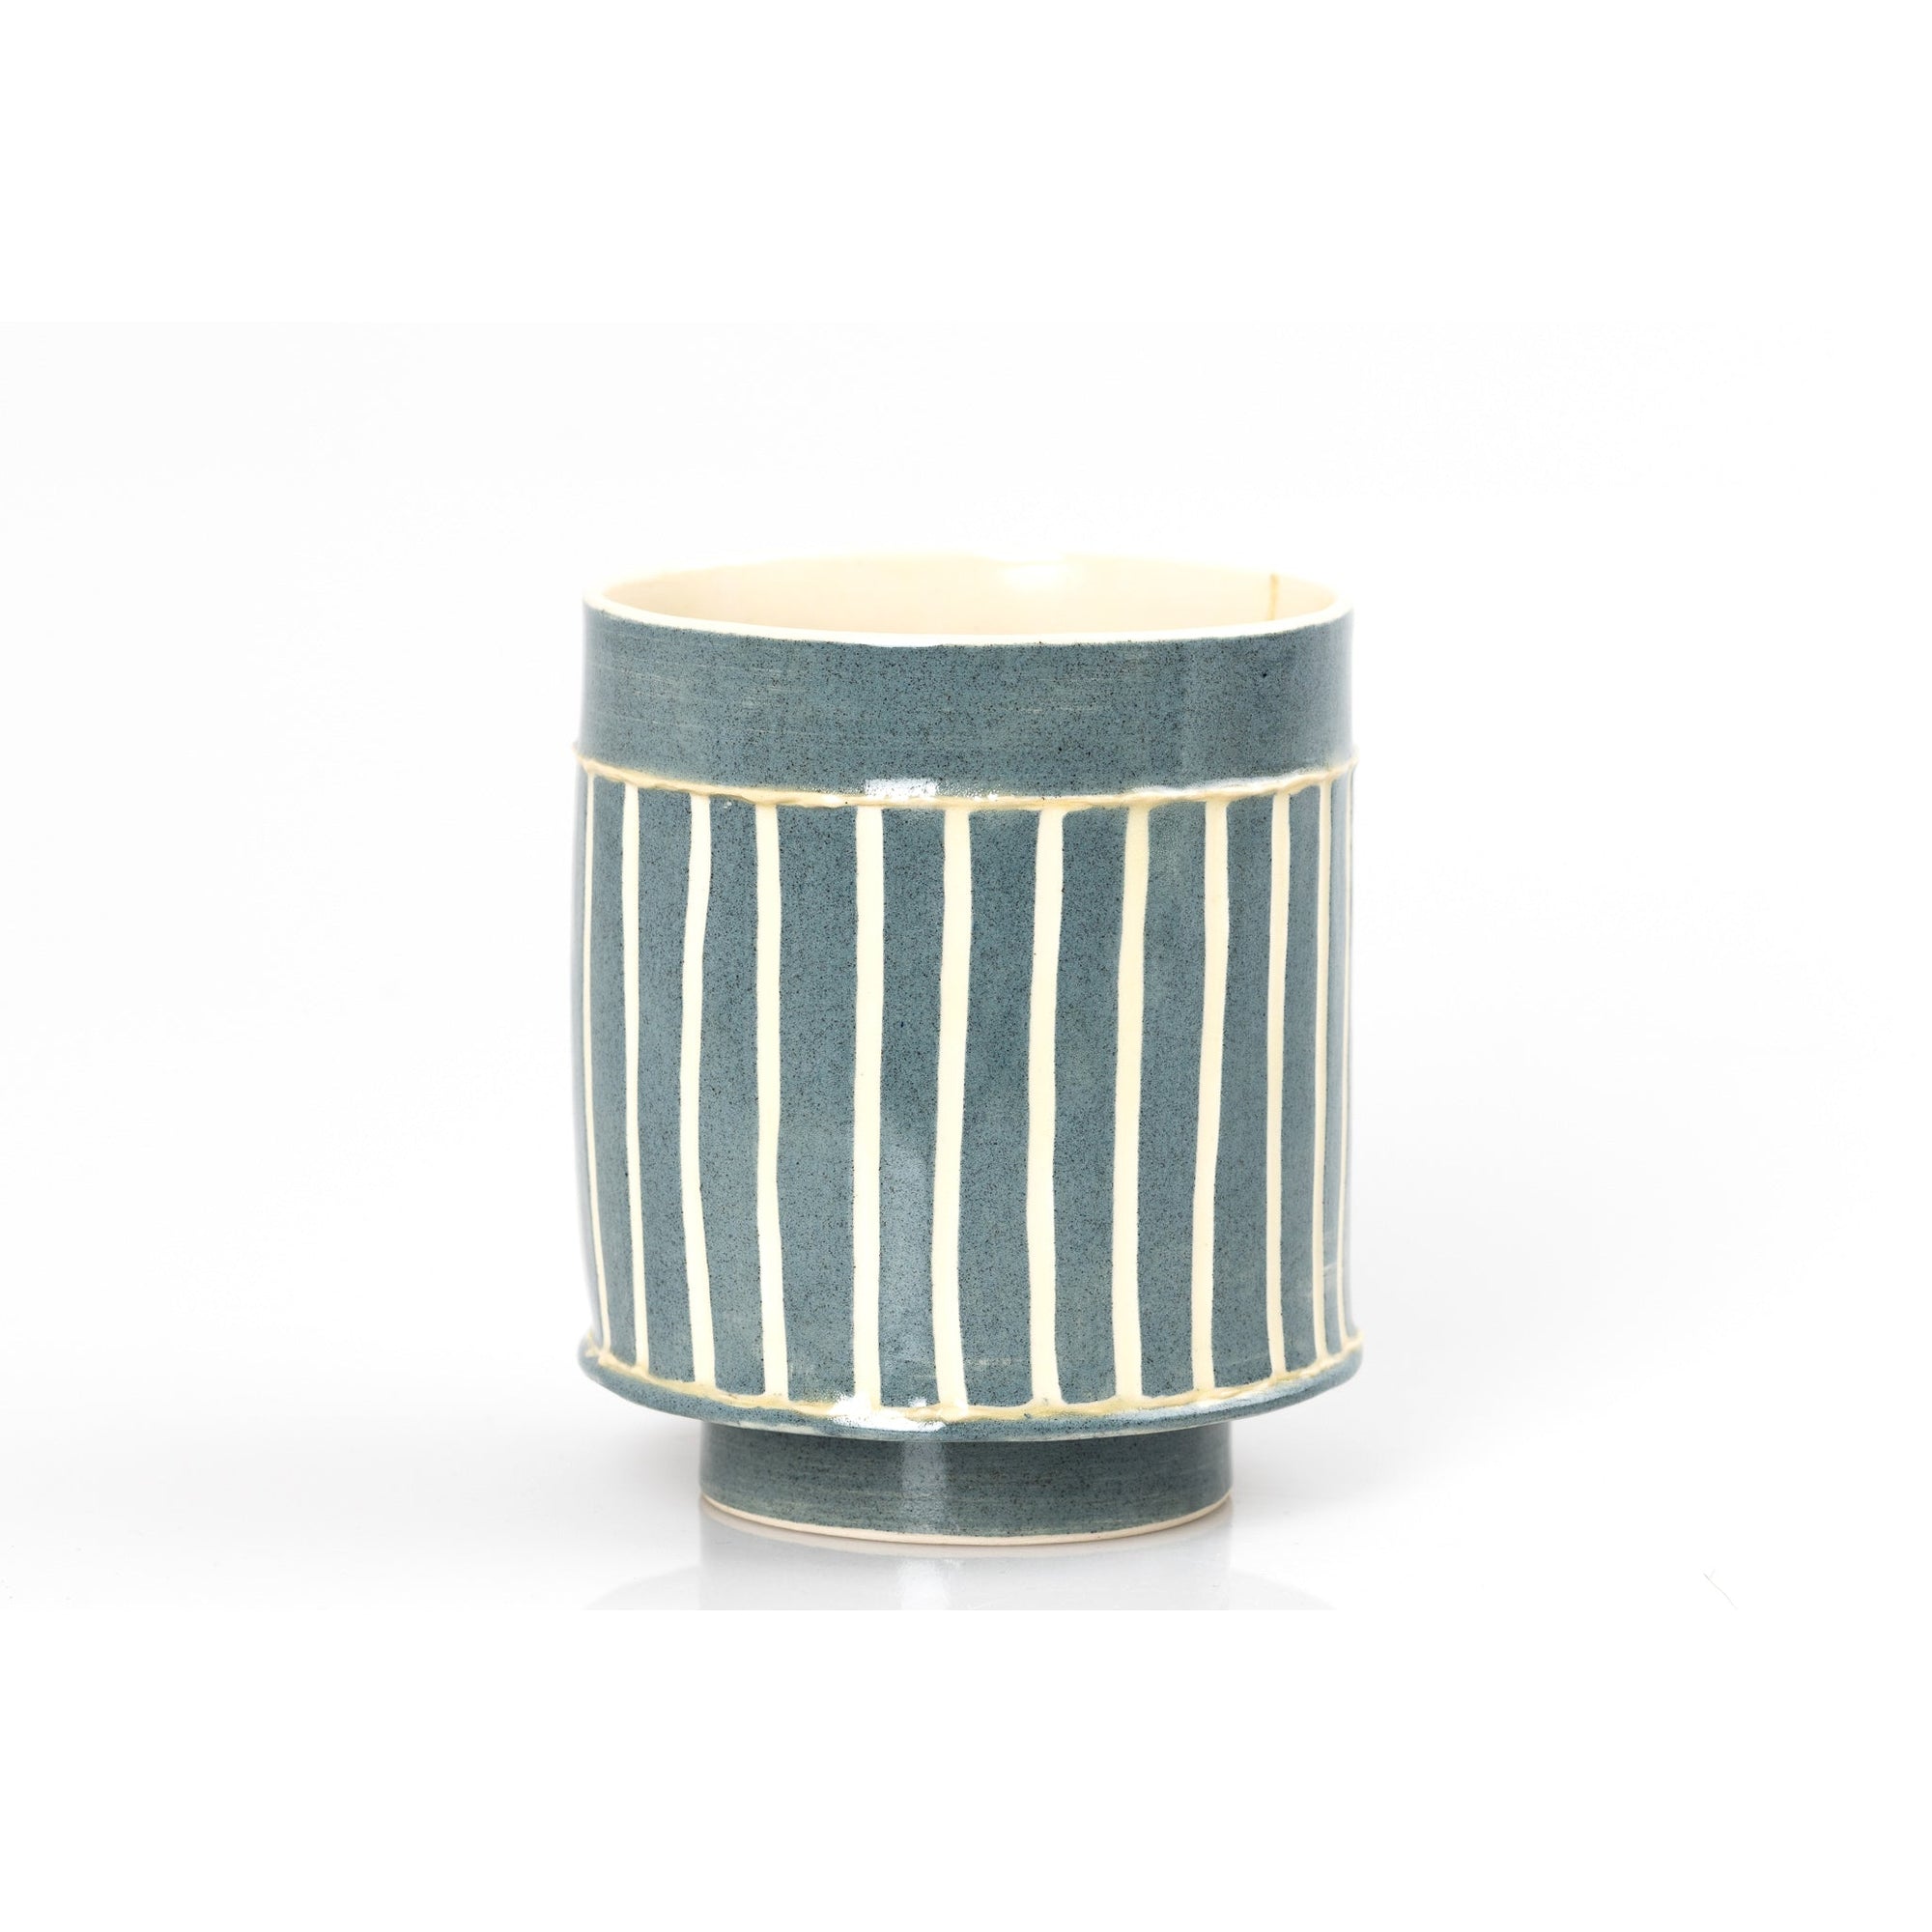 SV7 Small Vessel, handbuilt ceramic created by Emily-Kriste Wilcox, available from Padstow Gallery, Cornwall